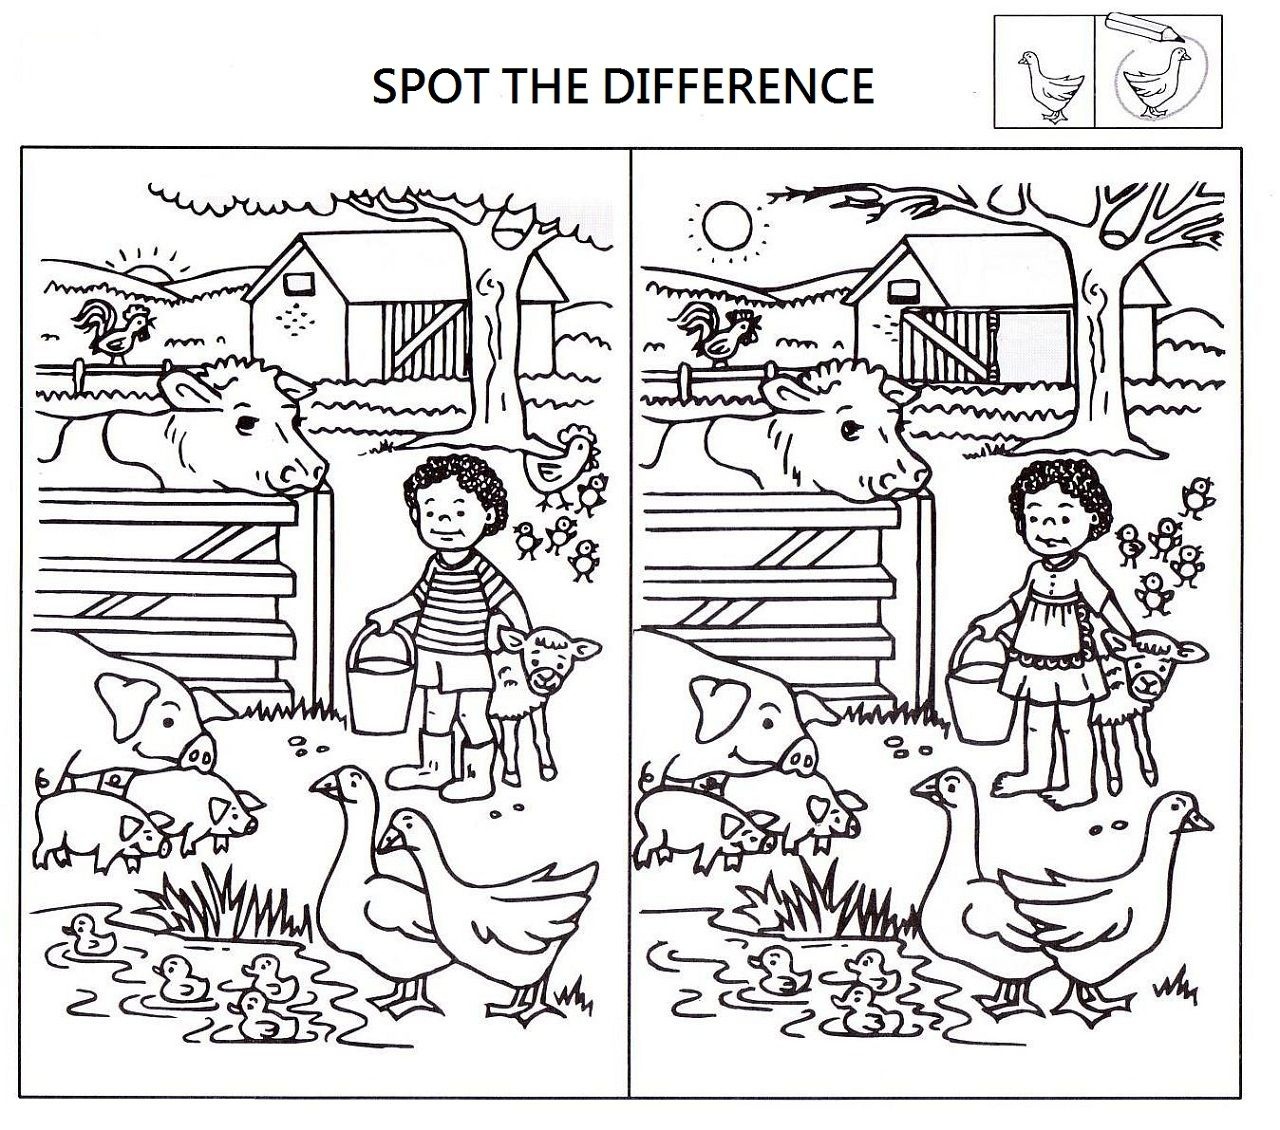 Spot The Difference Worksheets For Kids | Kids Worksheets Printable - Free Printable Spot The Difference For Kids